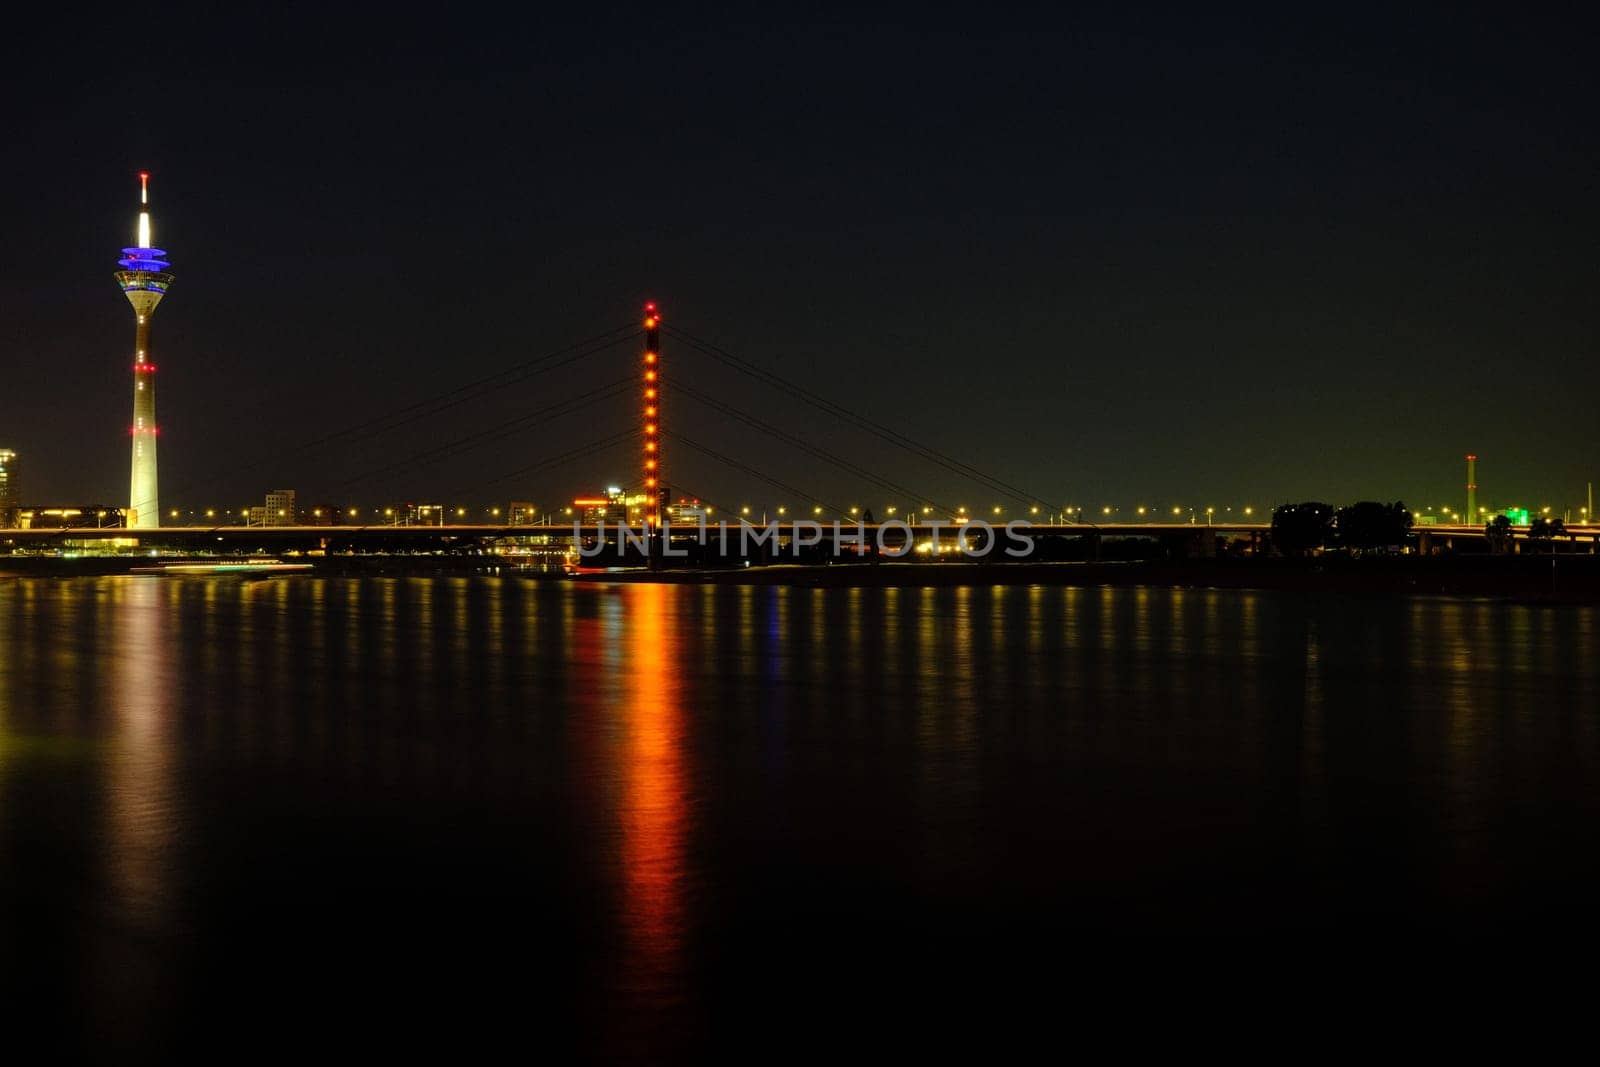 TV tower reflecting on Rhine River at night in Duesseldorf, Germany